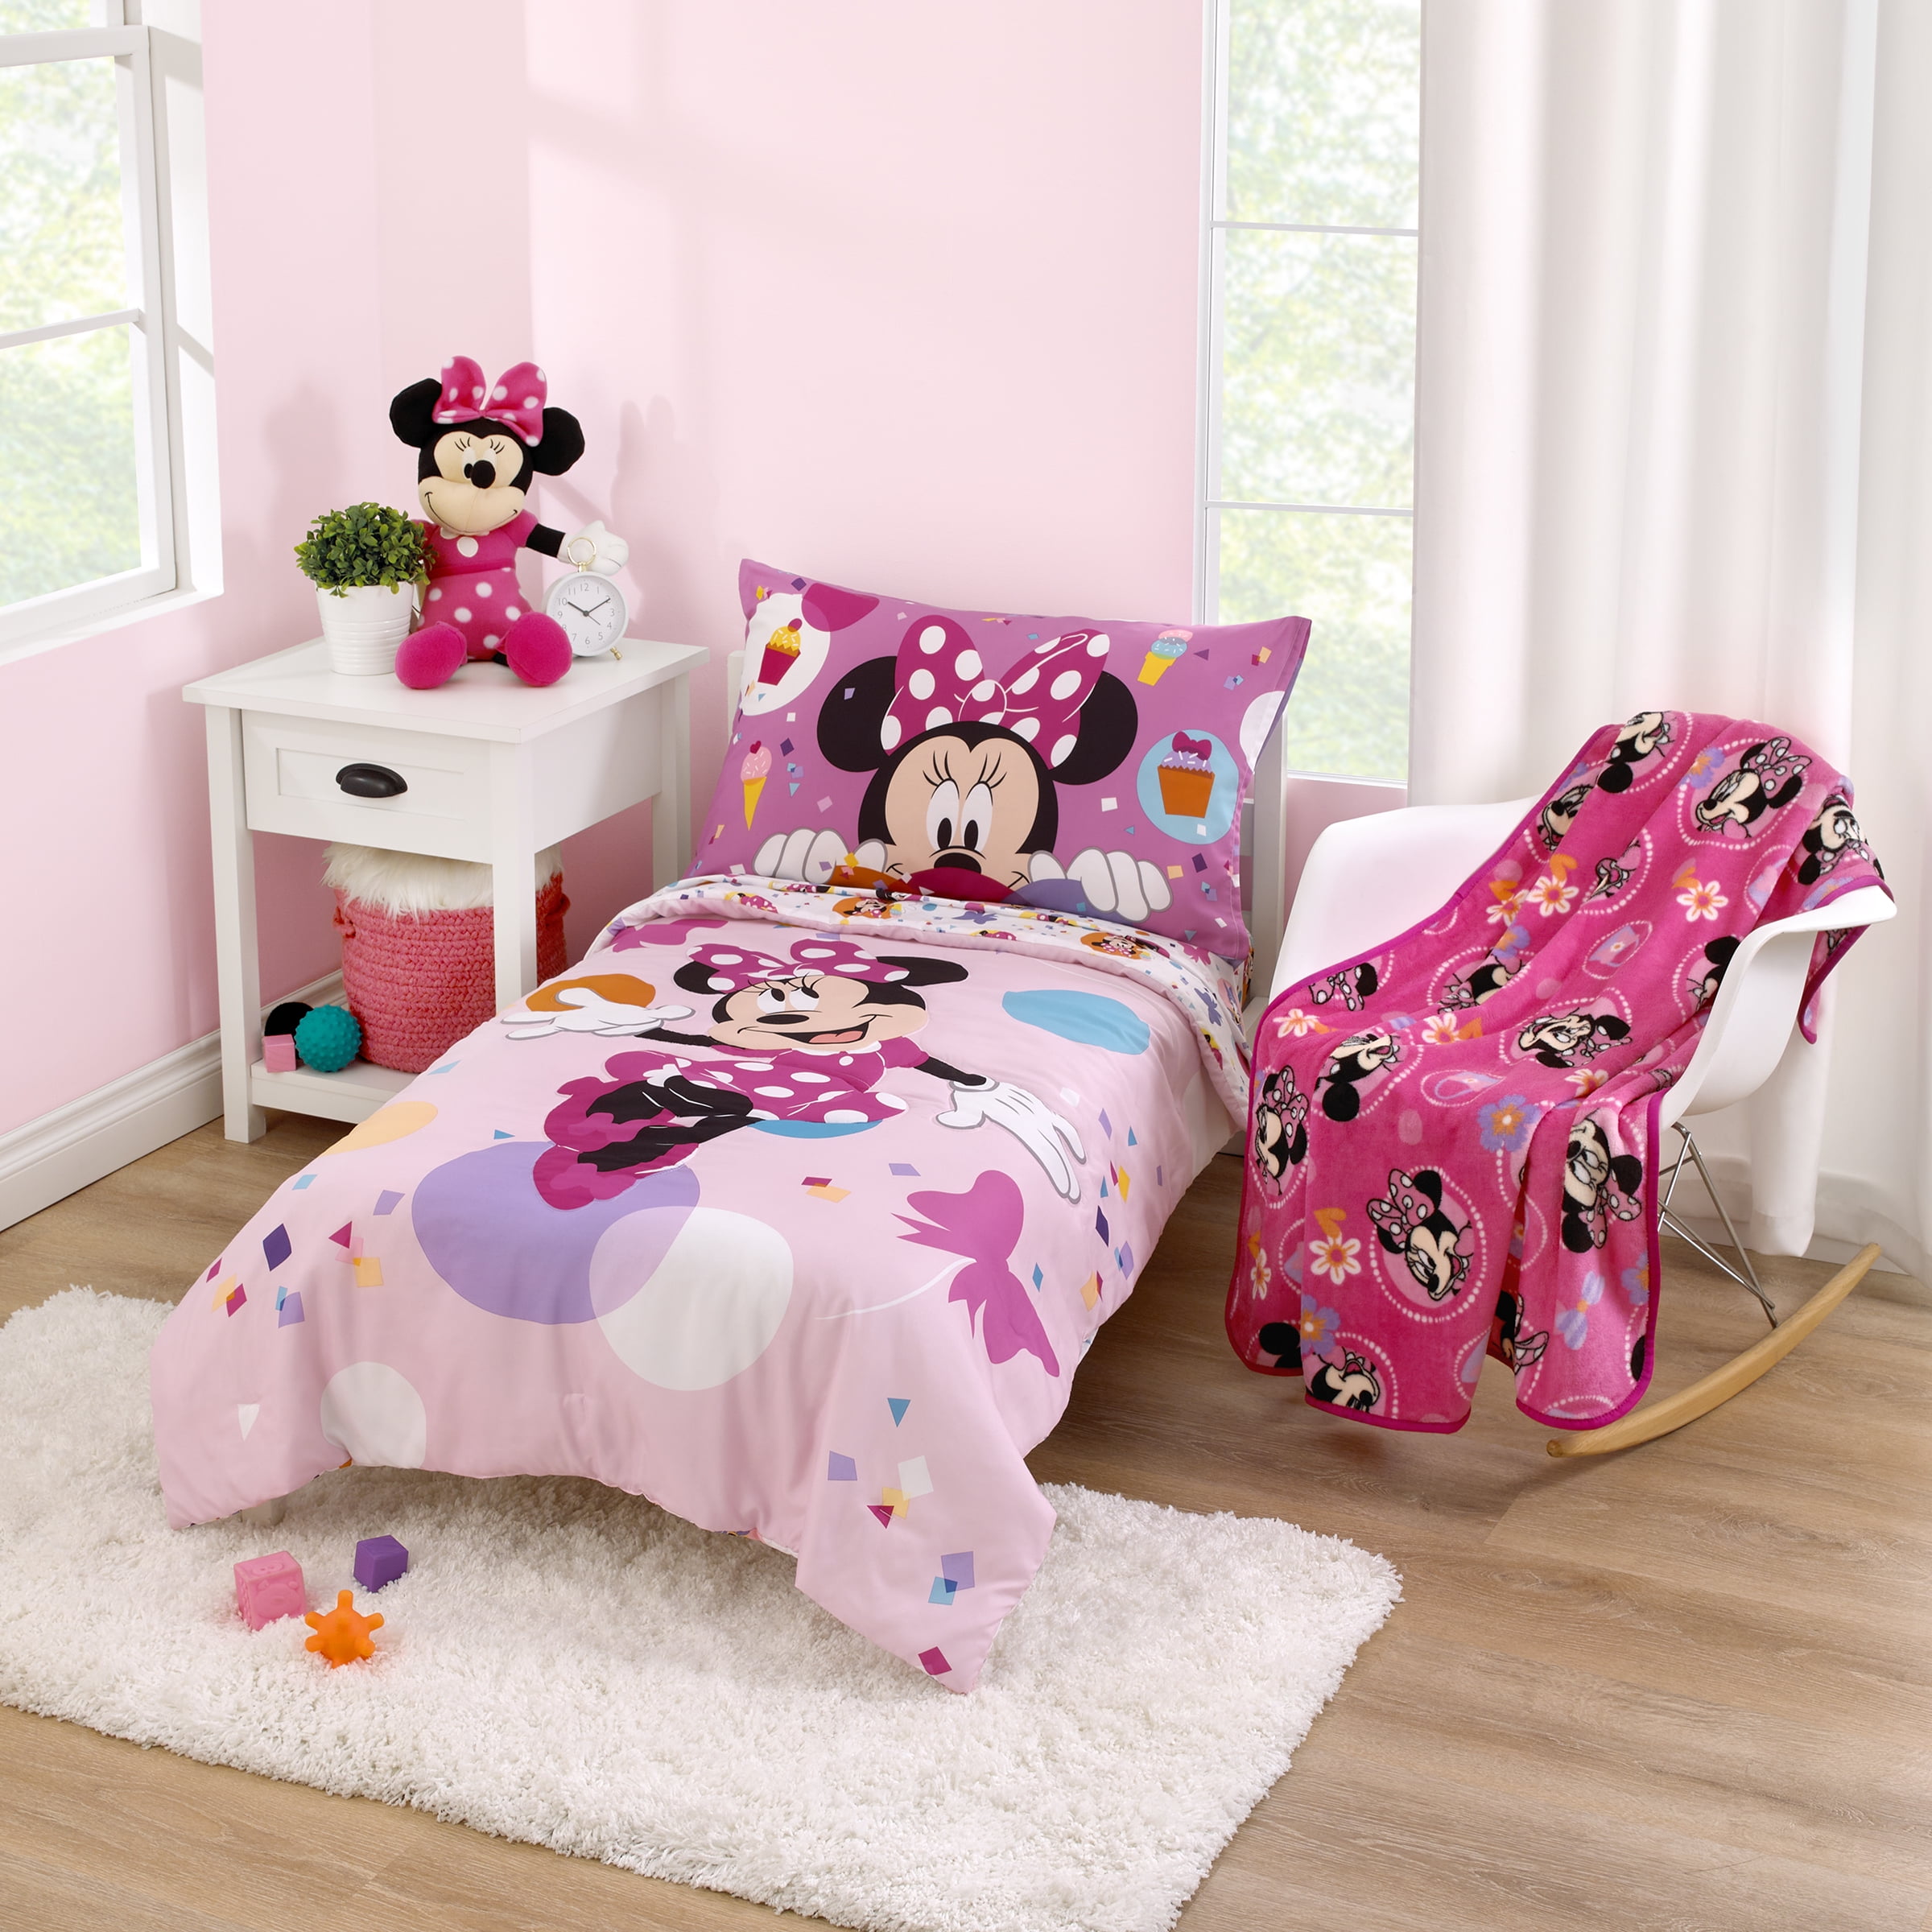 Disney Minnie Mouse 5 Piece Toddler Bedding Set Blanket Bundle Toddler Bed Girl Pink Polyester 03871c66 A356 43f3 8245 A13a2b792499.ac8bb72566d42ca8adfea09466000eb0 